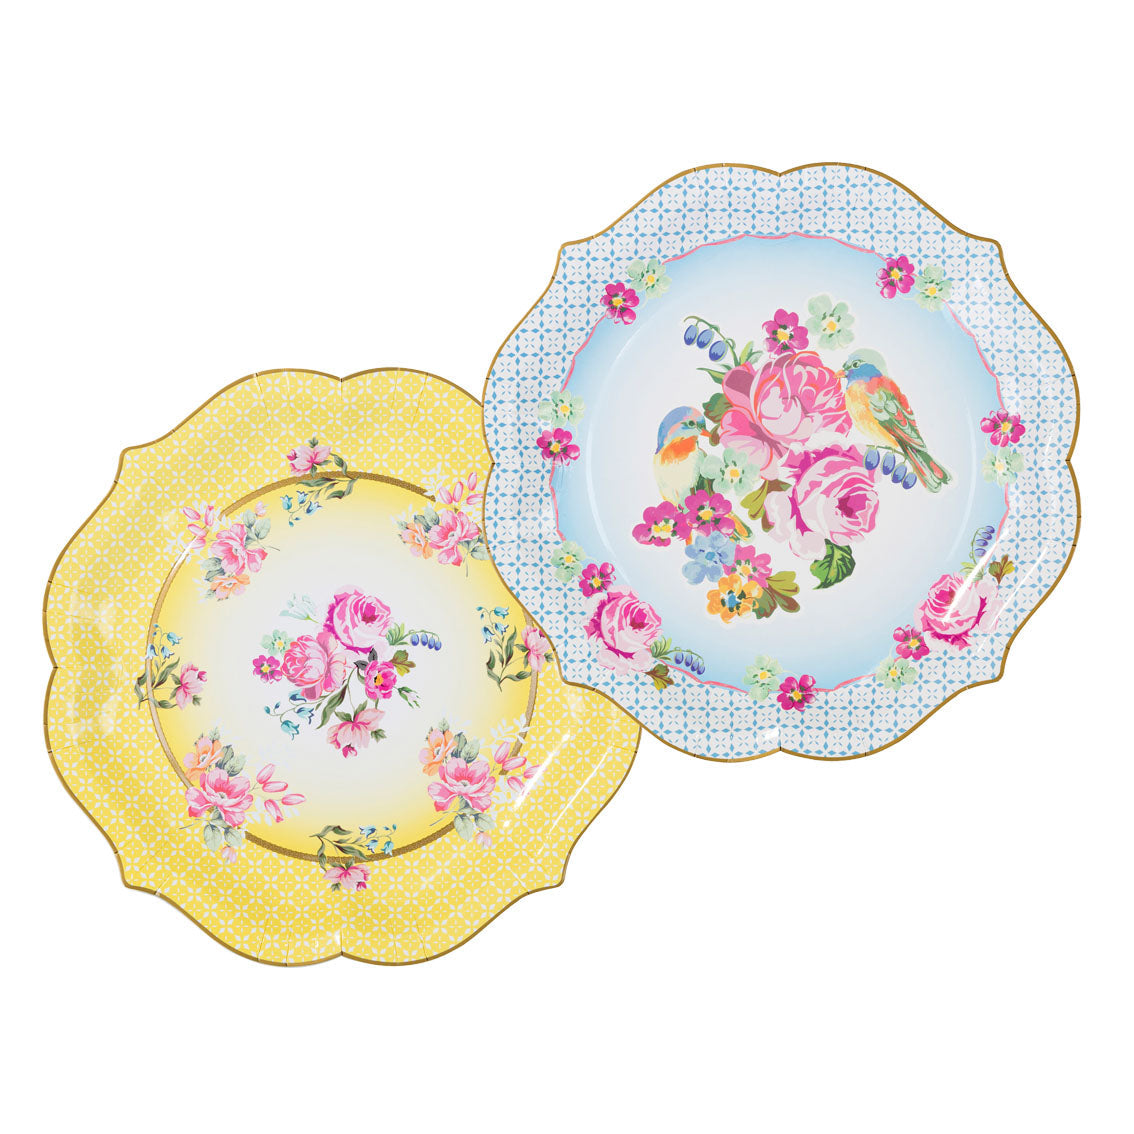 Truly Scrumptious Serving Plates Party tableware